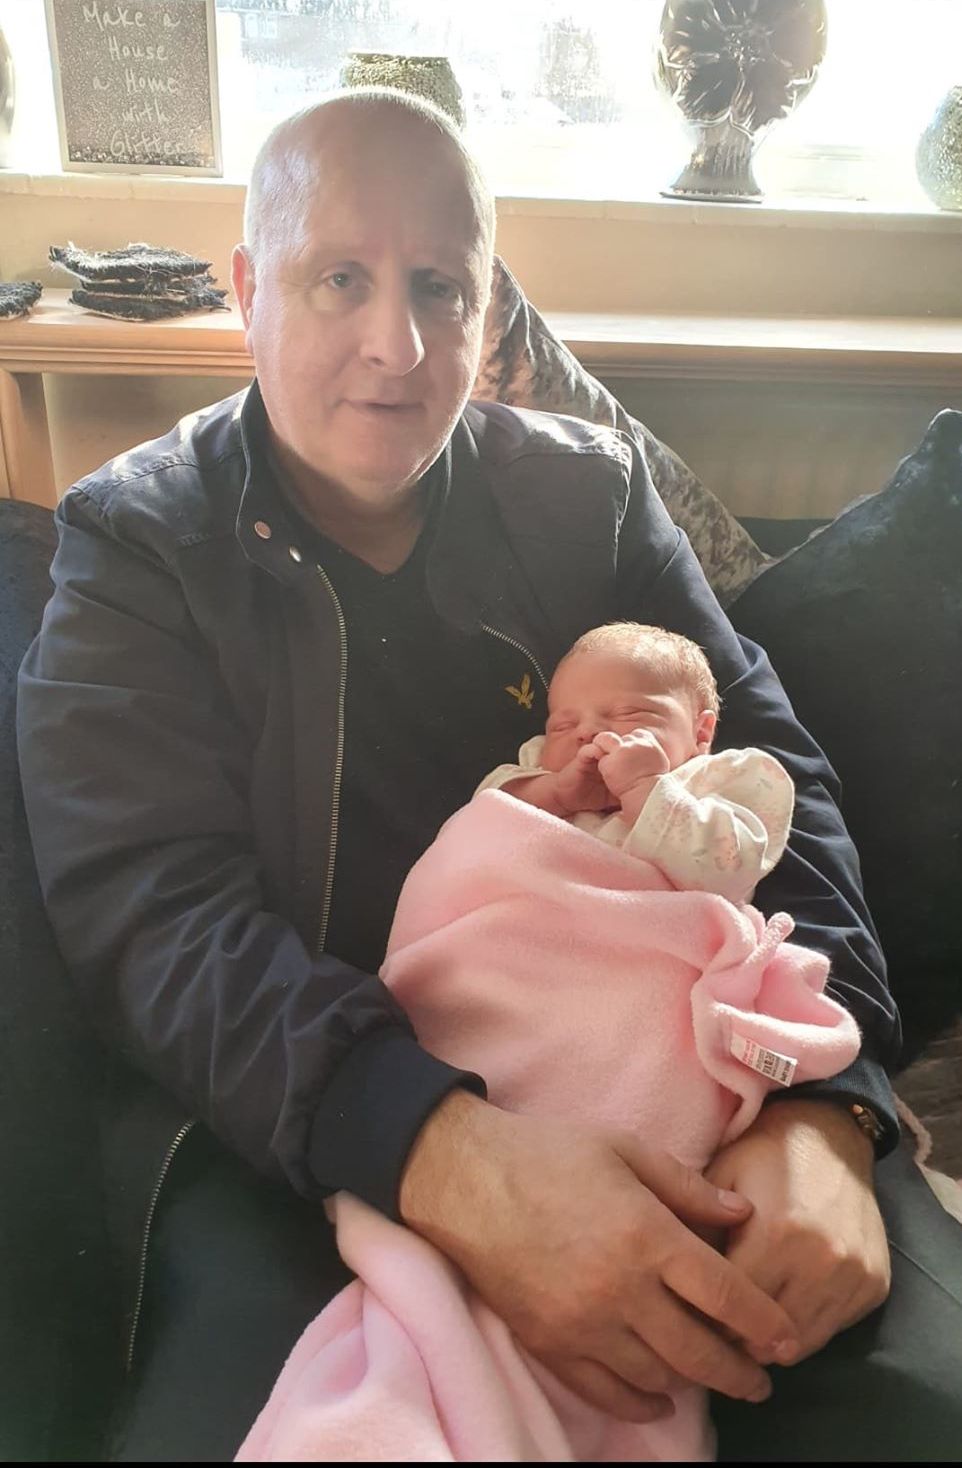 Garry Melia, from Southport, has died with Covid-19. He is pictured with daughter Sienna, who is eight weeks old. 